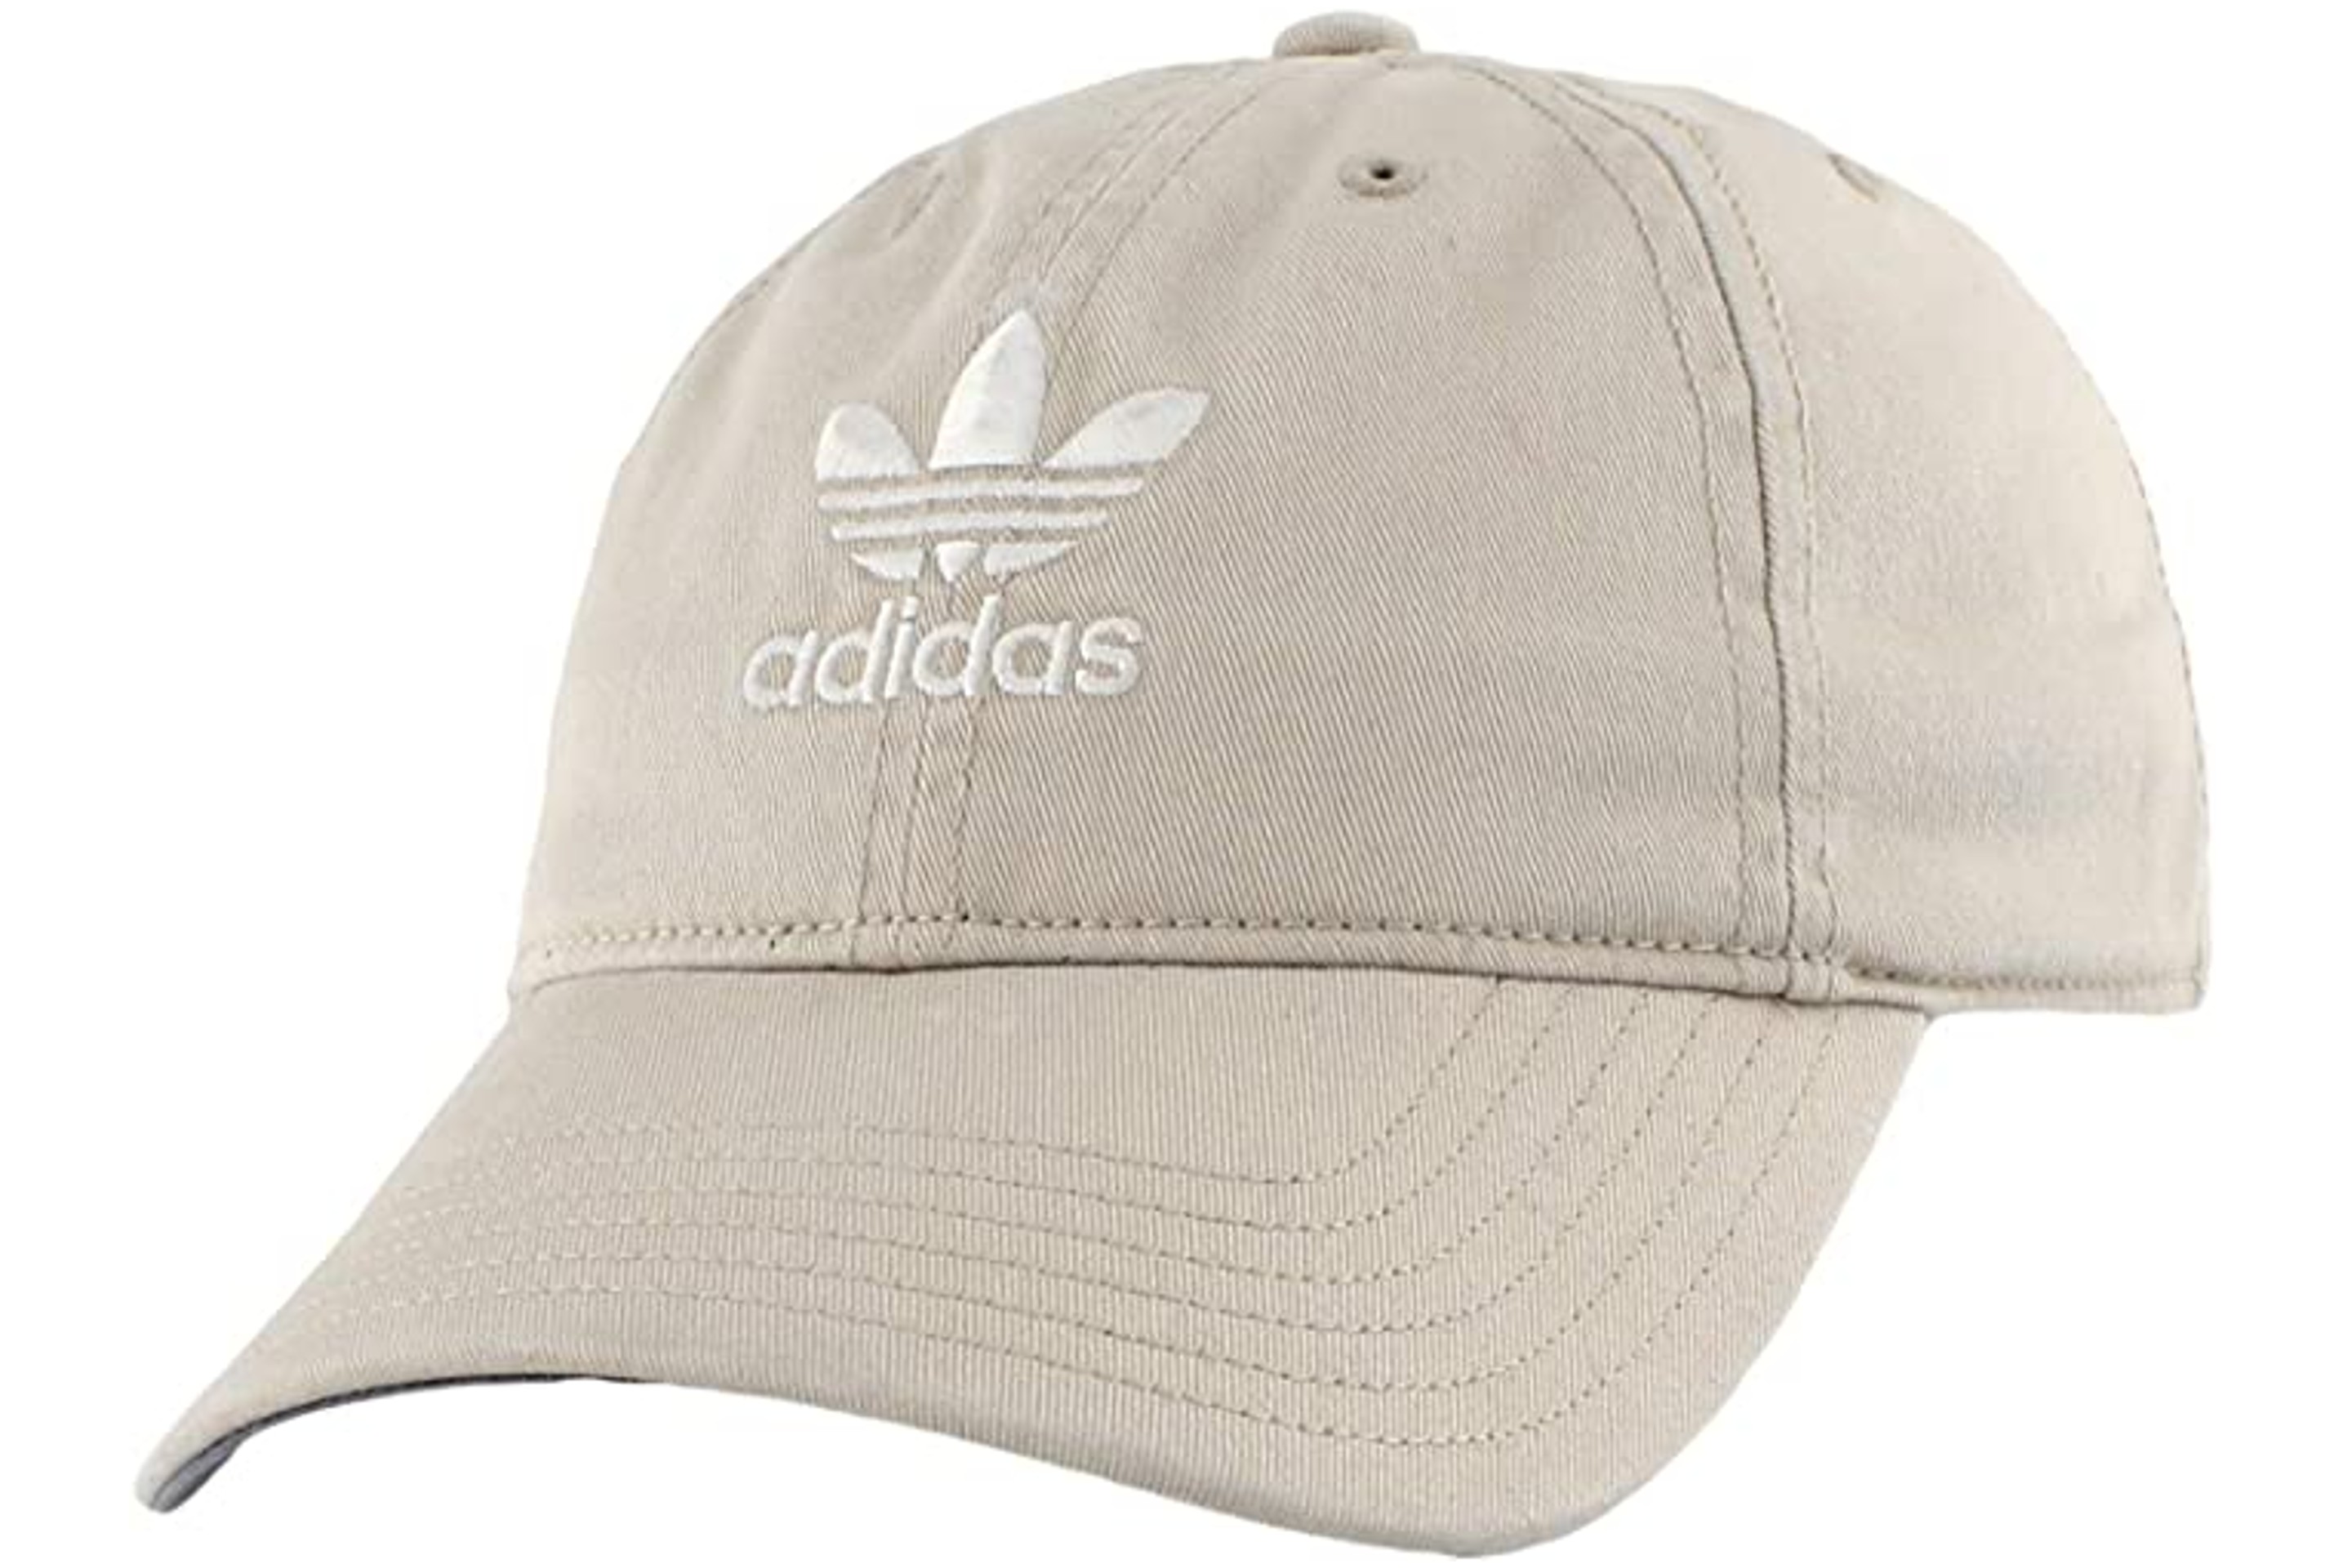 Store and Save on Adidas Hats, Luggage, and Extra